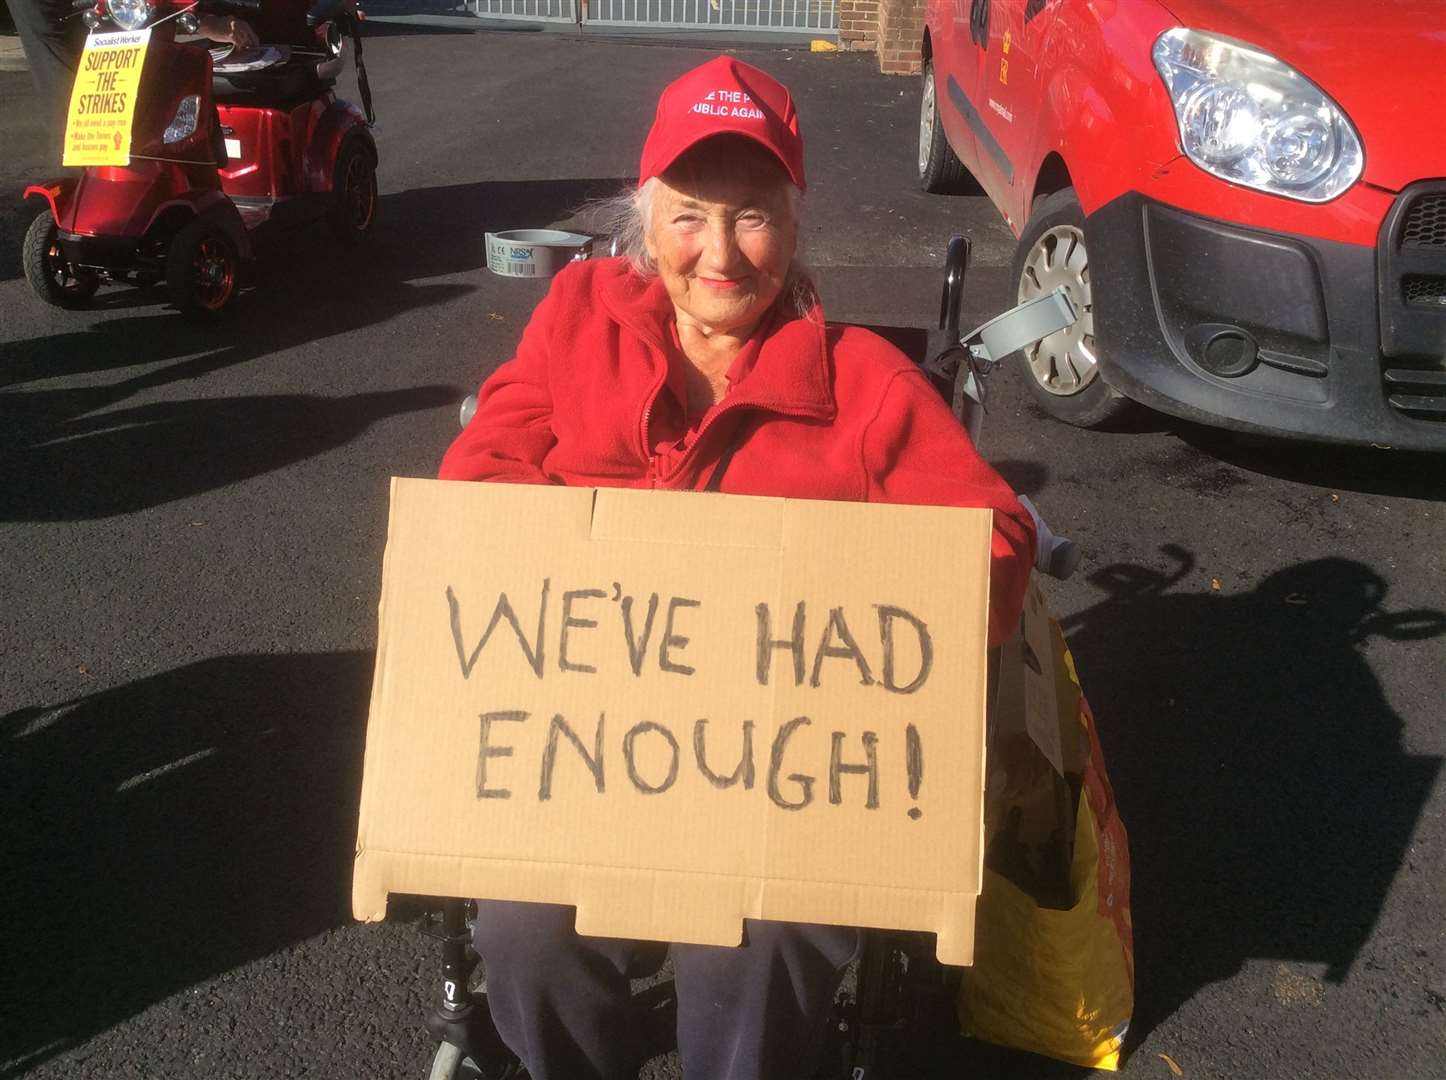 Disabled activist Christine Tongue of Access Thanet who spoked at the protest